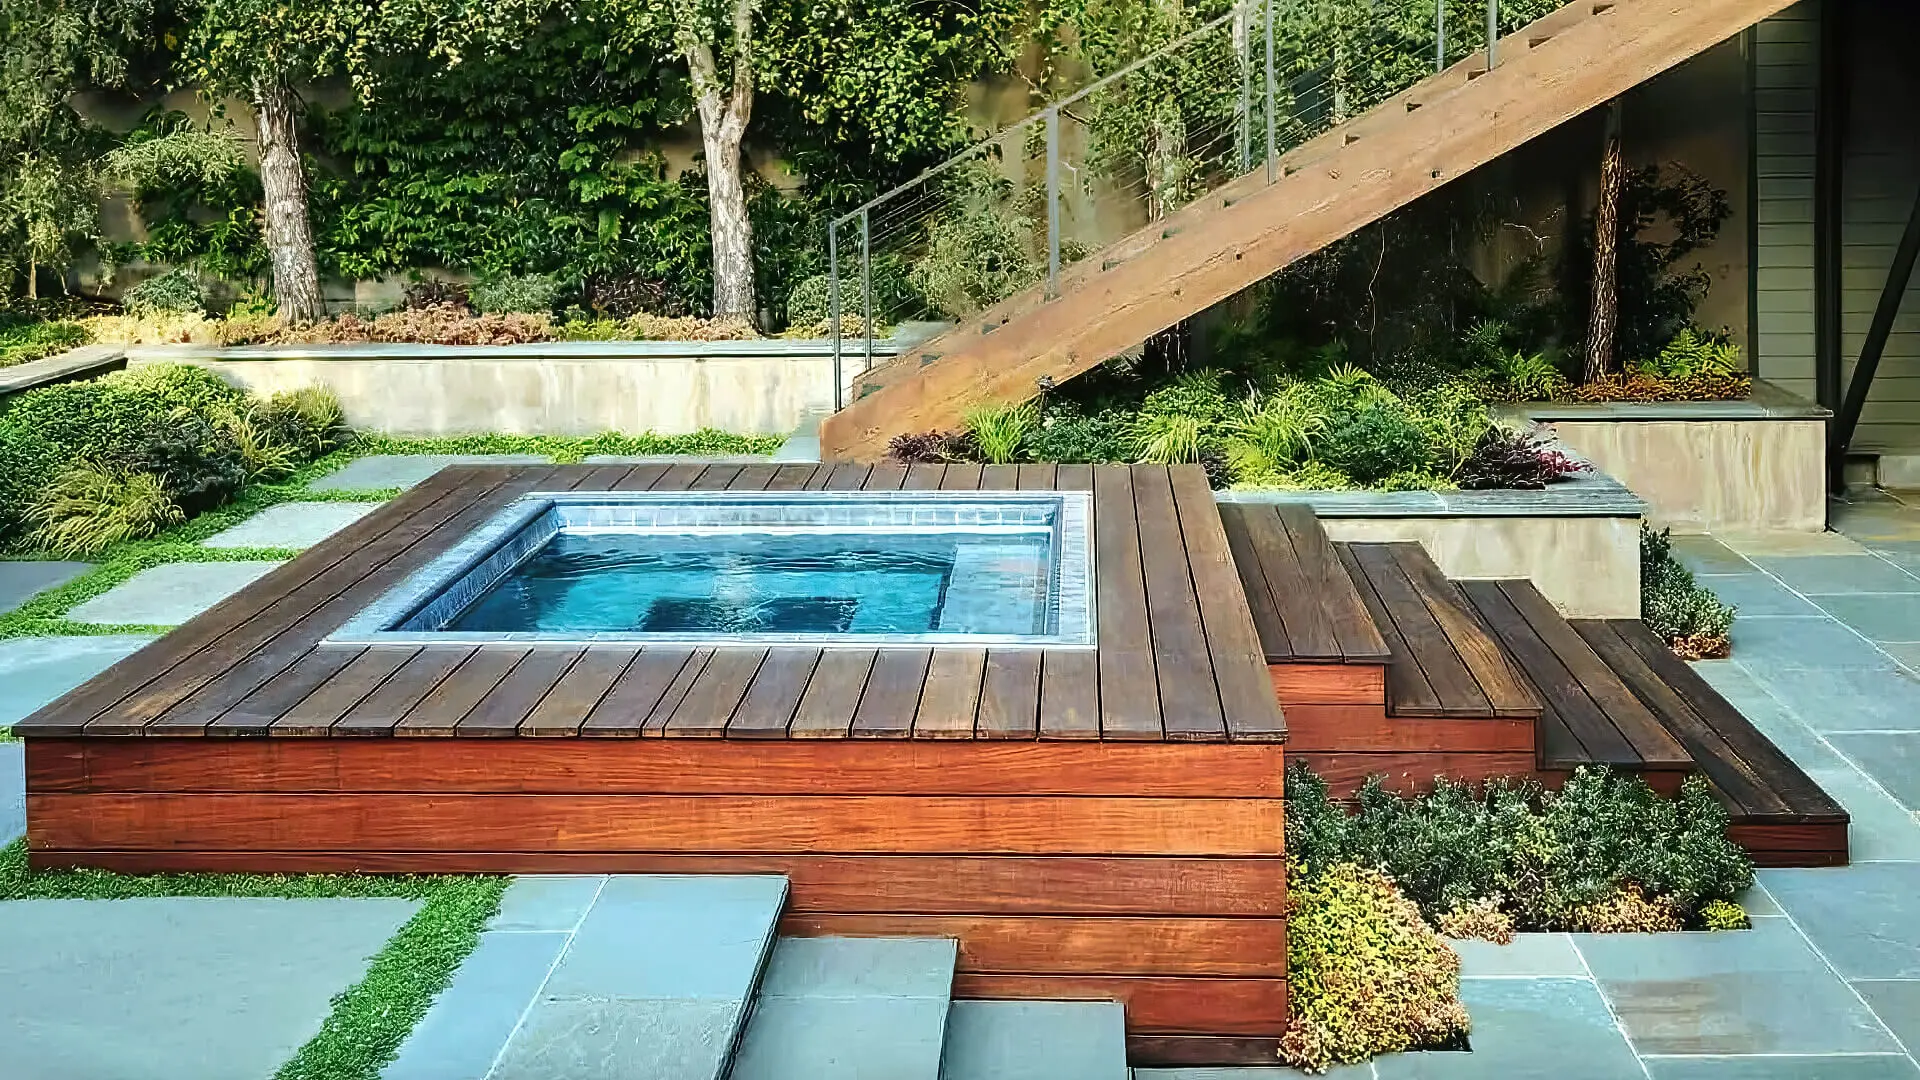 Hot Tub Deck Ideas For A Relaxing Backyard ‐ The Pool Co